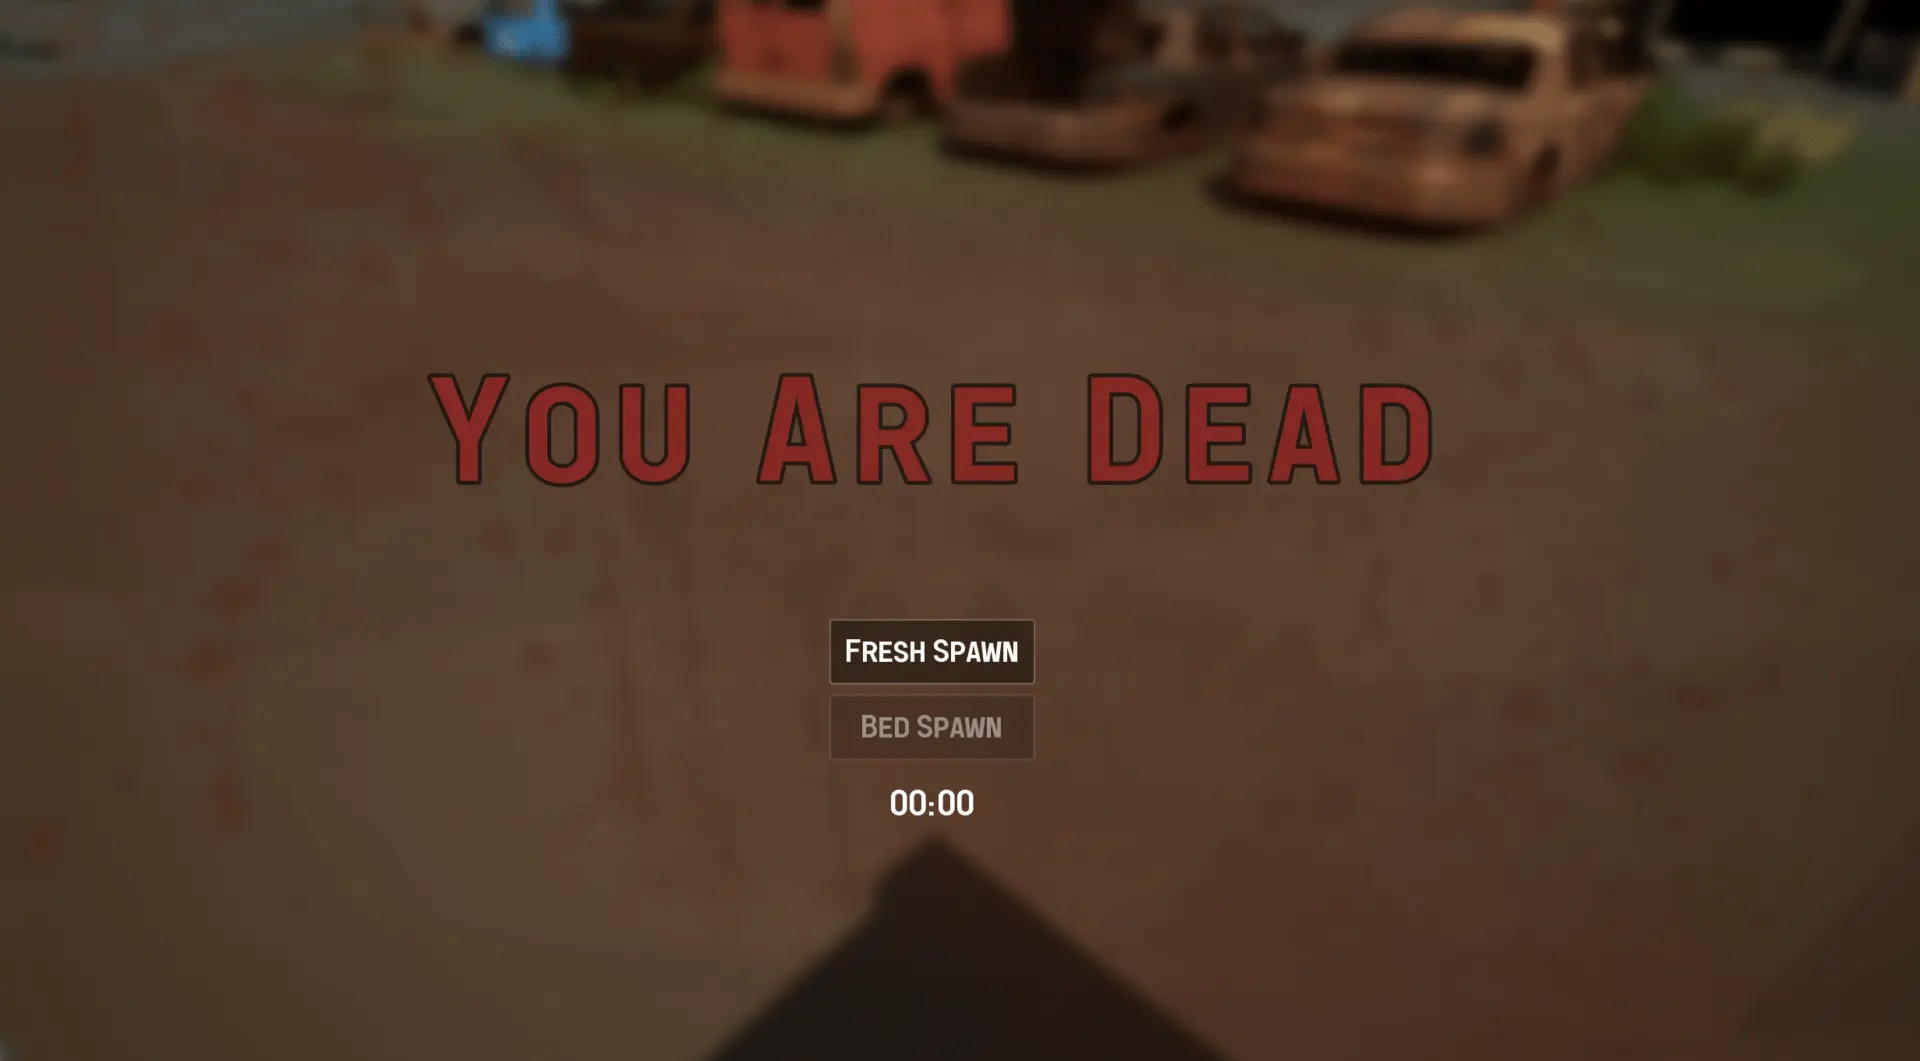 The "You are dead" screen that shows when a player dies in ZSGO.